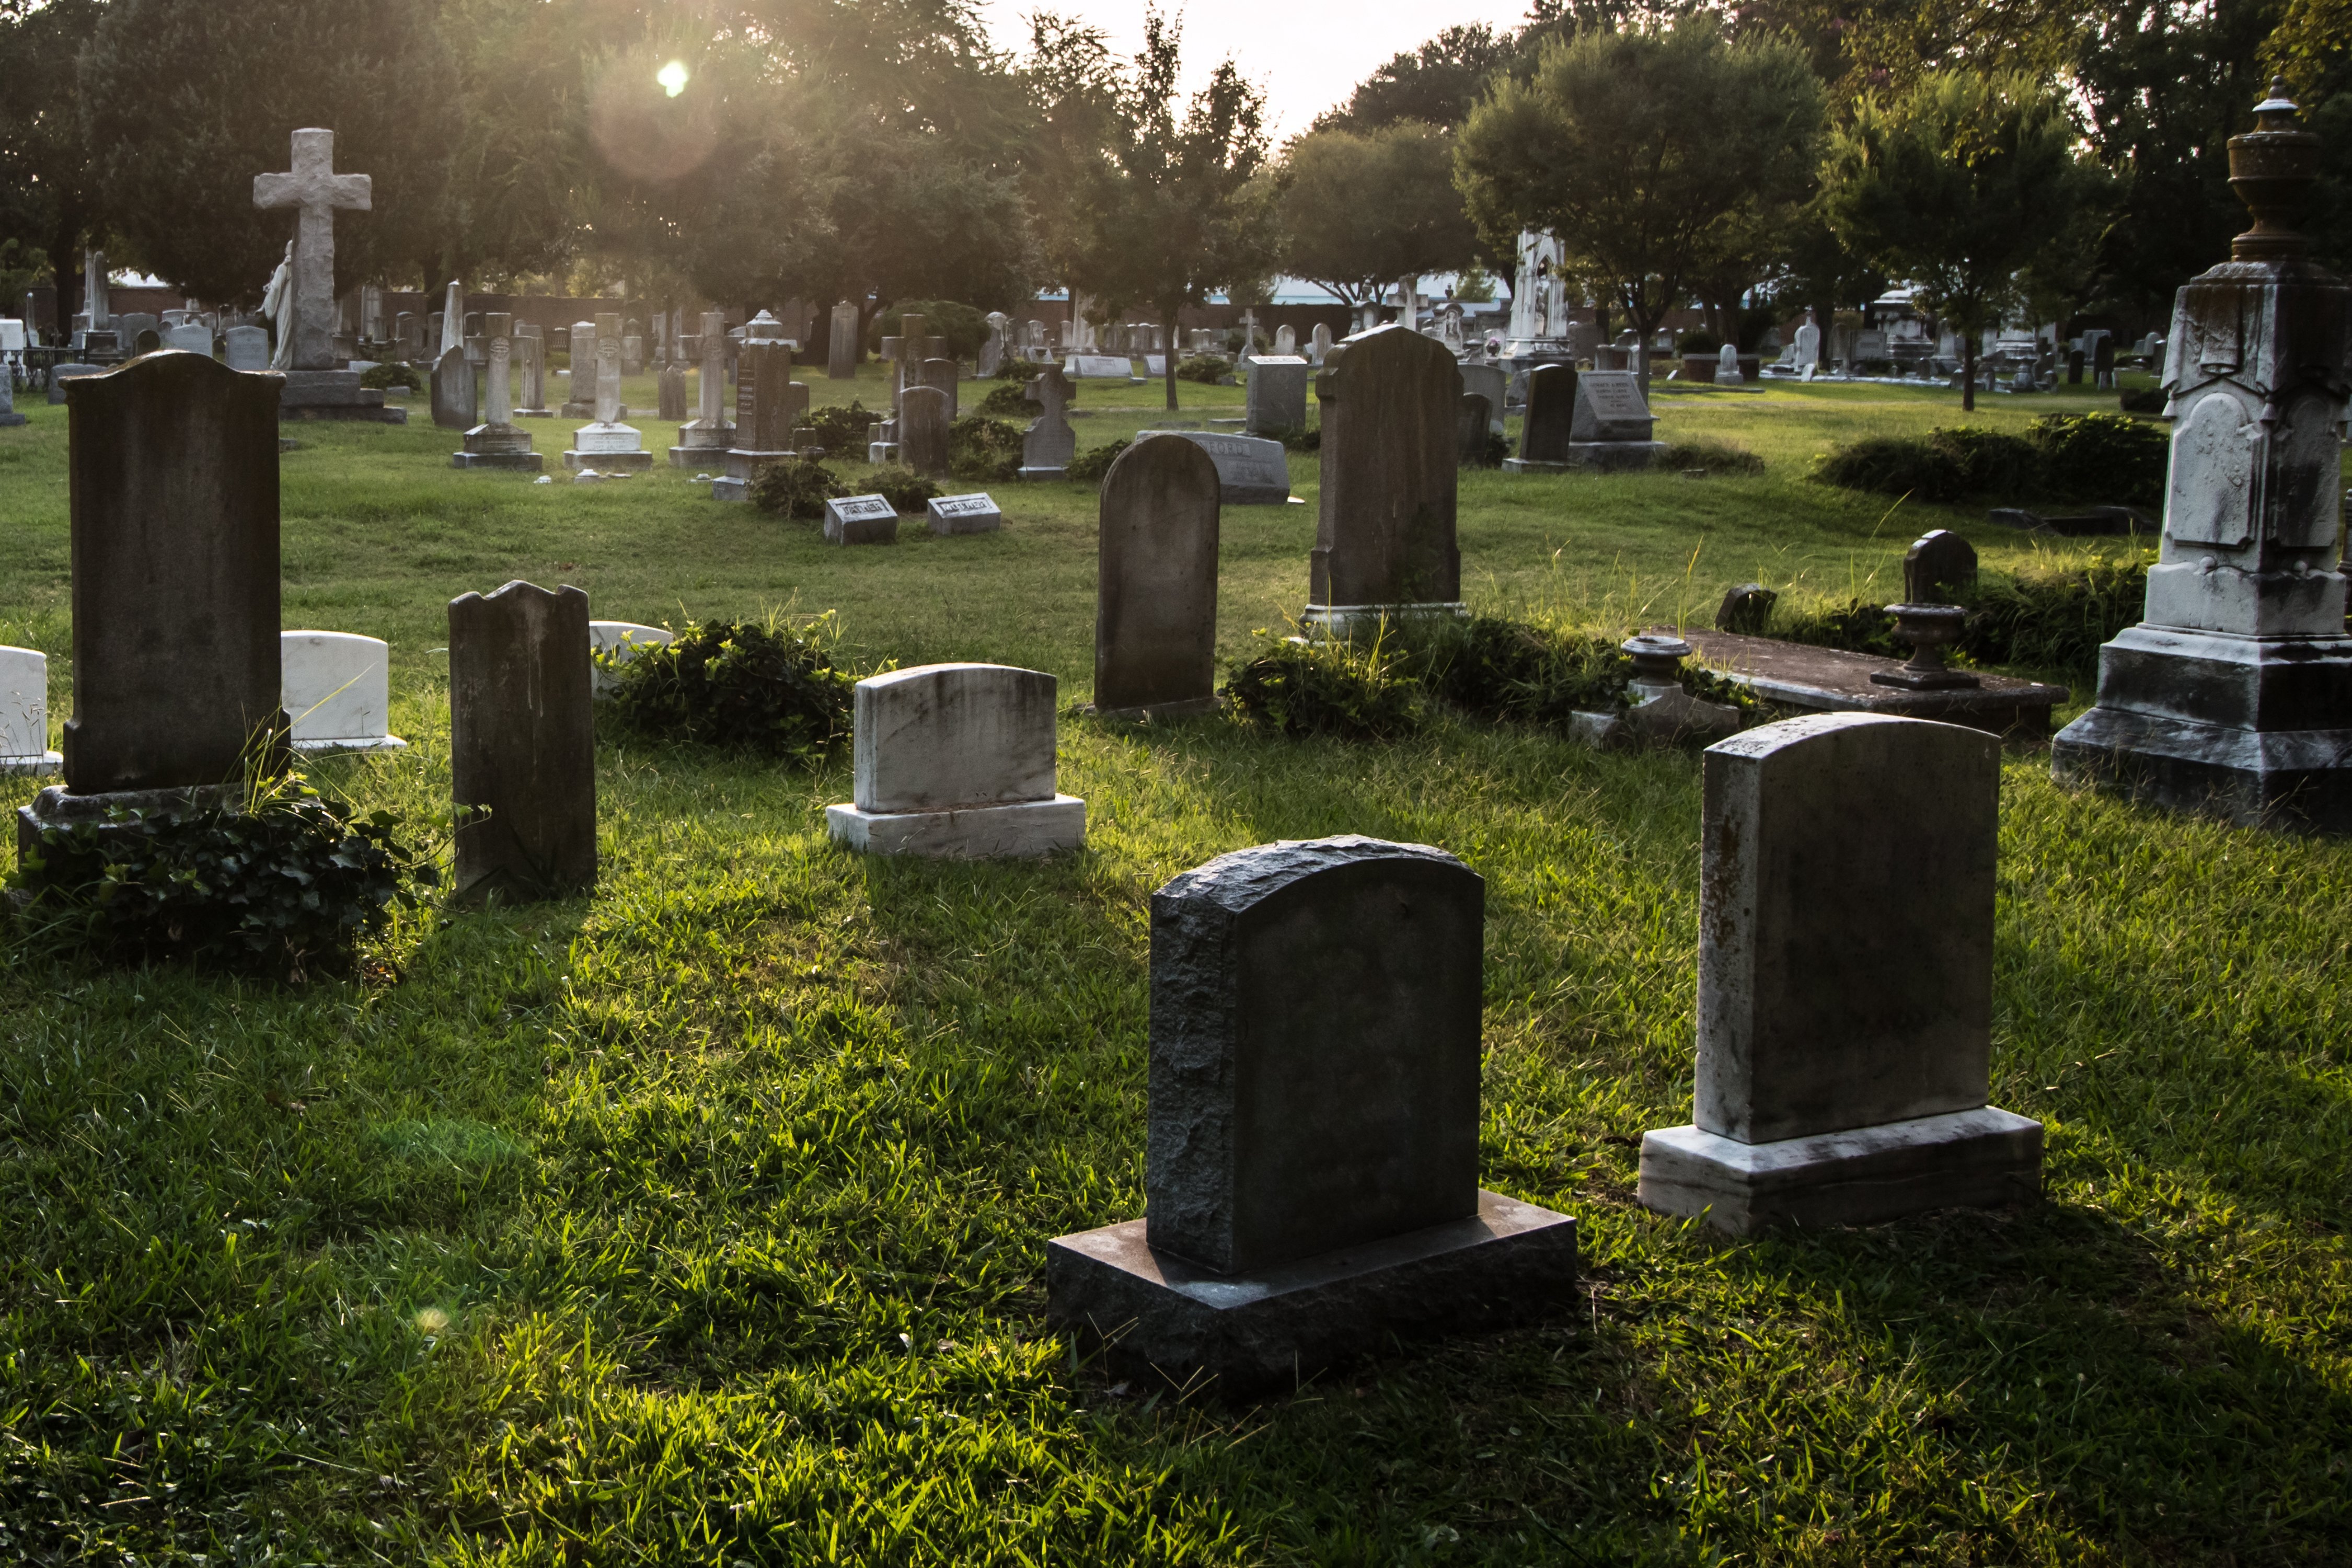 Tombstones in cemetery at dusk | Photo: Shutterstock.com